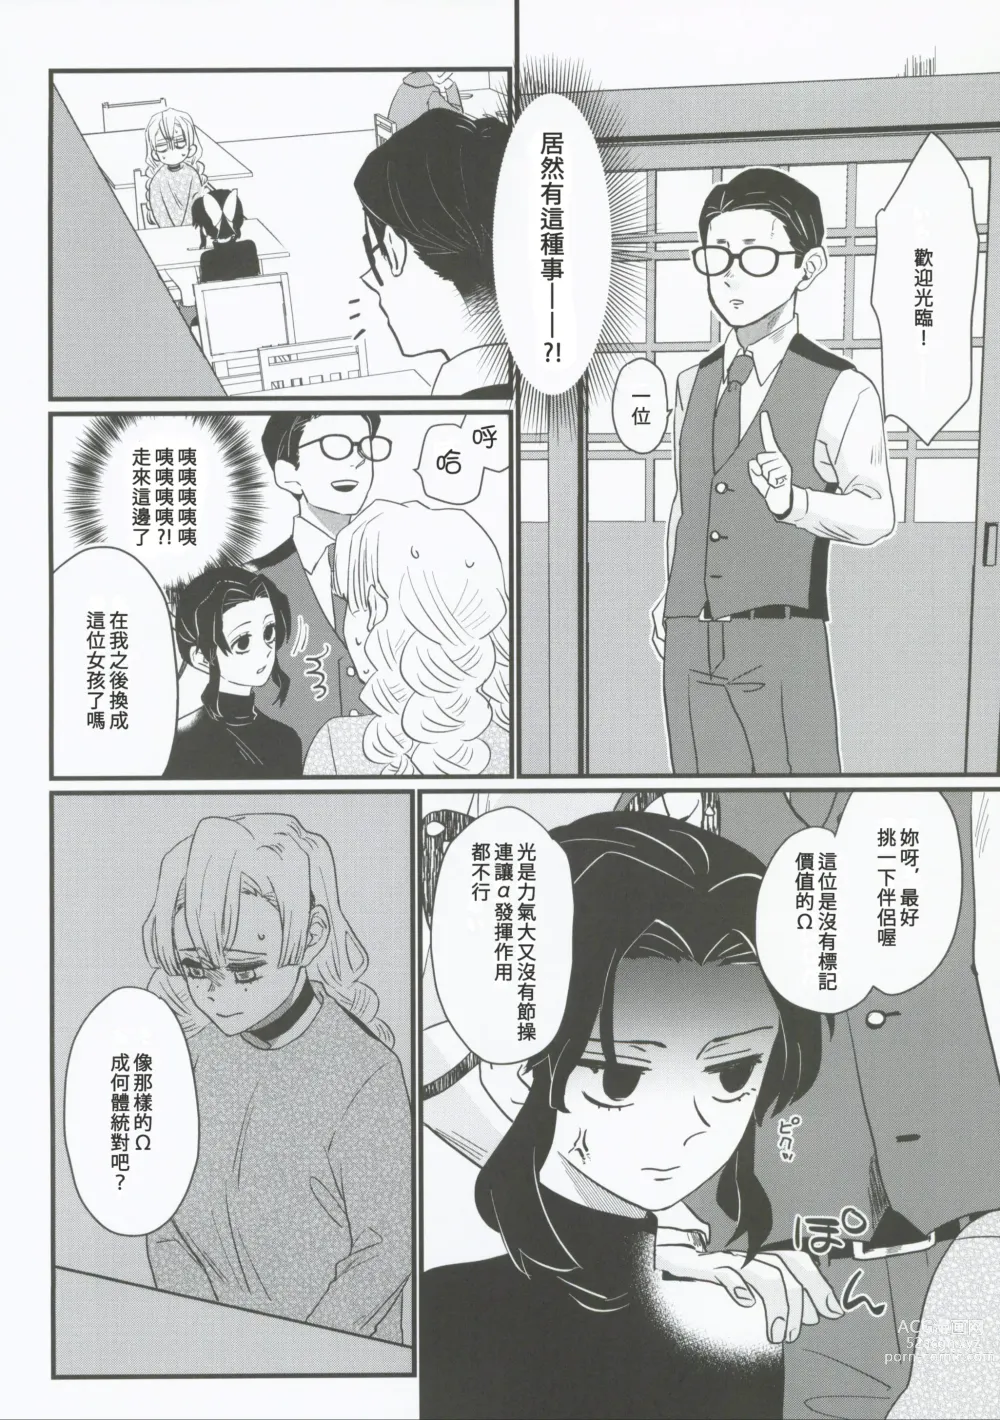 Page 18 of doujinshi 屬於妳的Omega